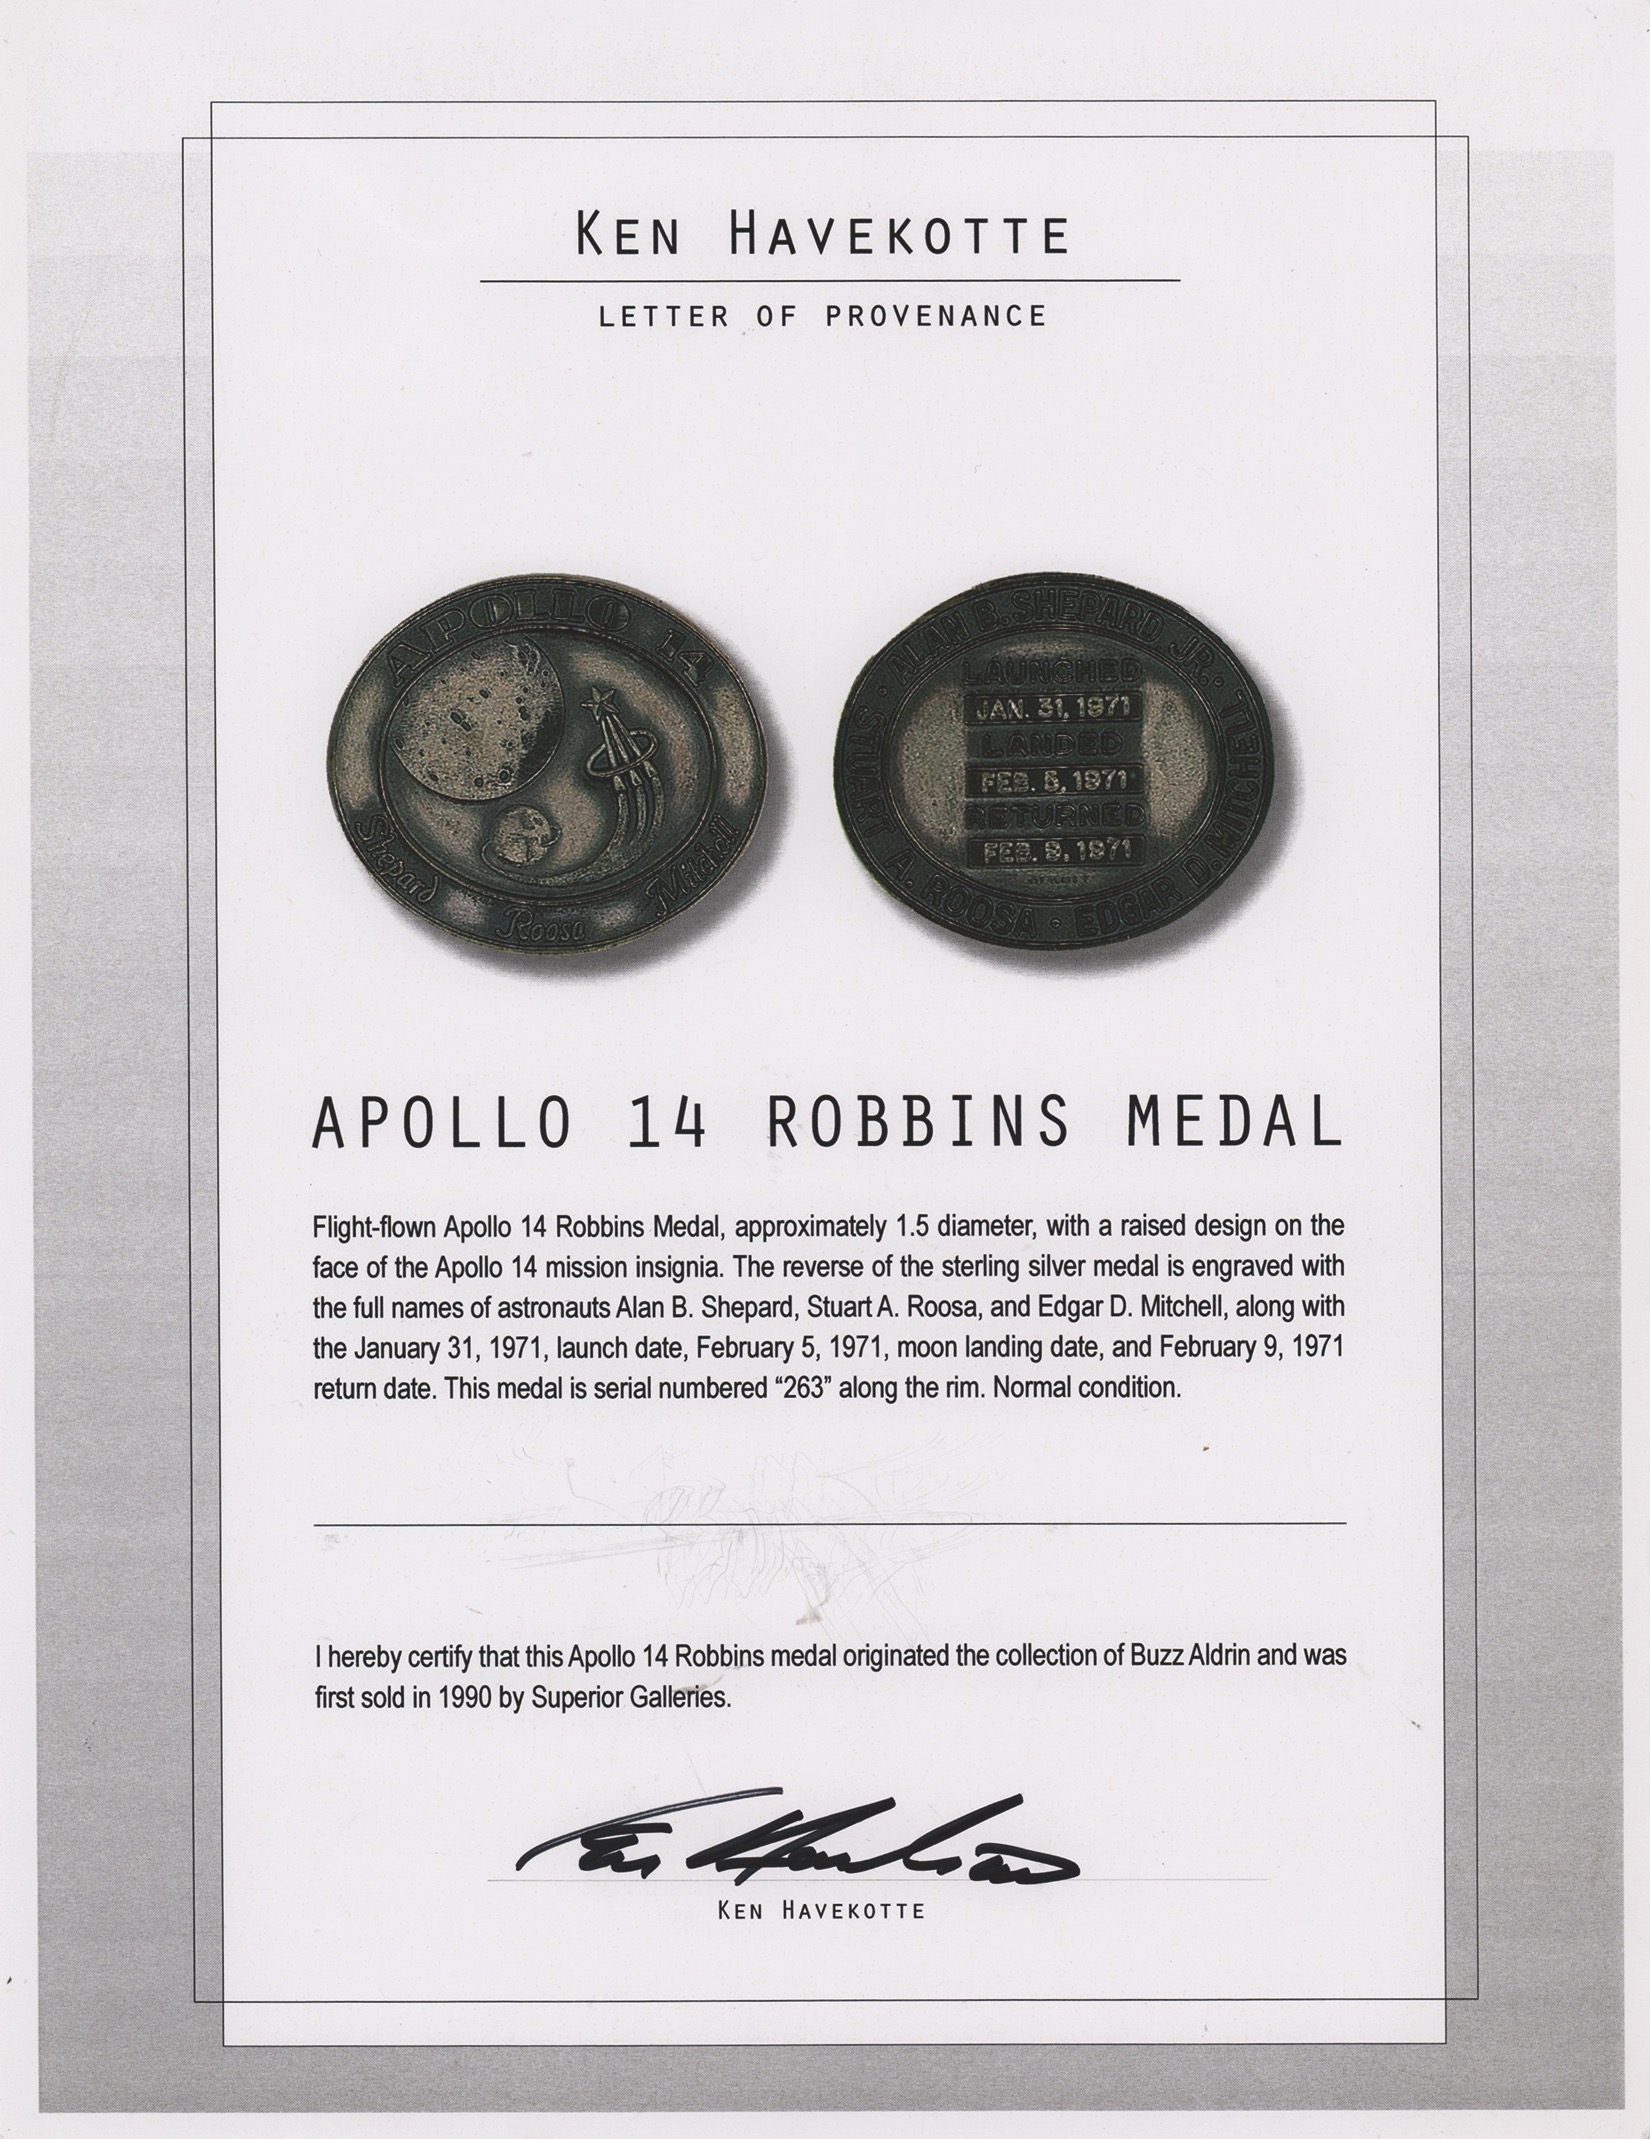 Lot #7405 Apollo 14 Robbins Medallion (Attested as Flown and from the Collection of Buzz Aldrin) - Image 4